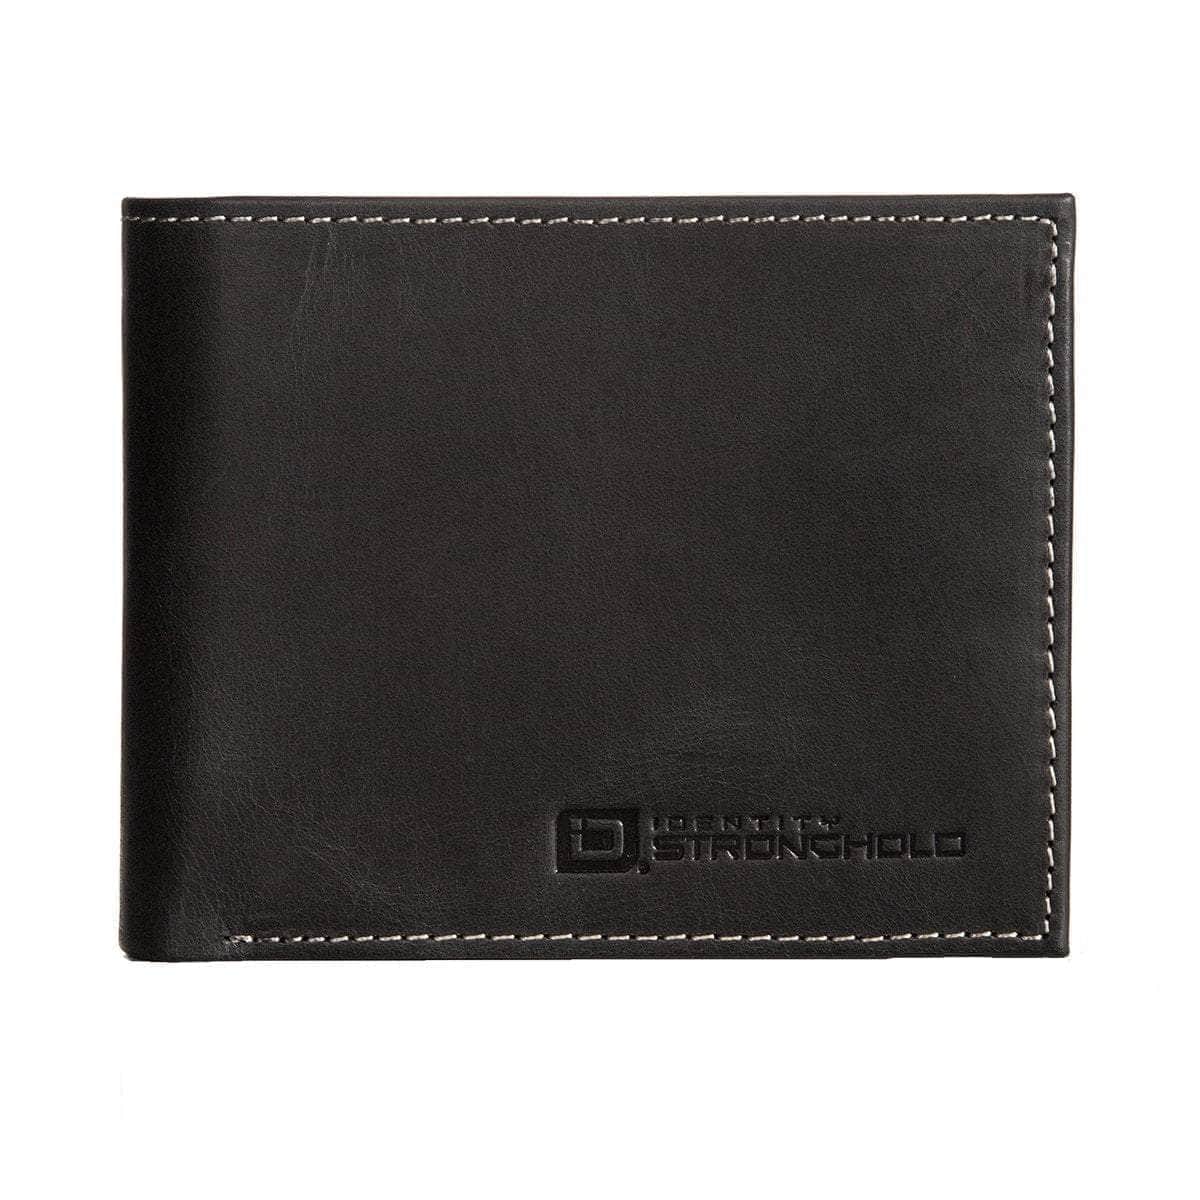 ID Stronghold Men's Wallet Black Mens RFID Bifold Wallet 10 slot - Classic Leather